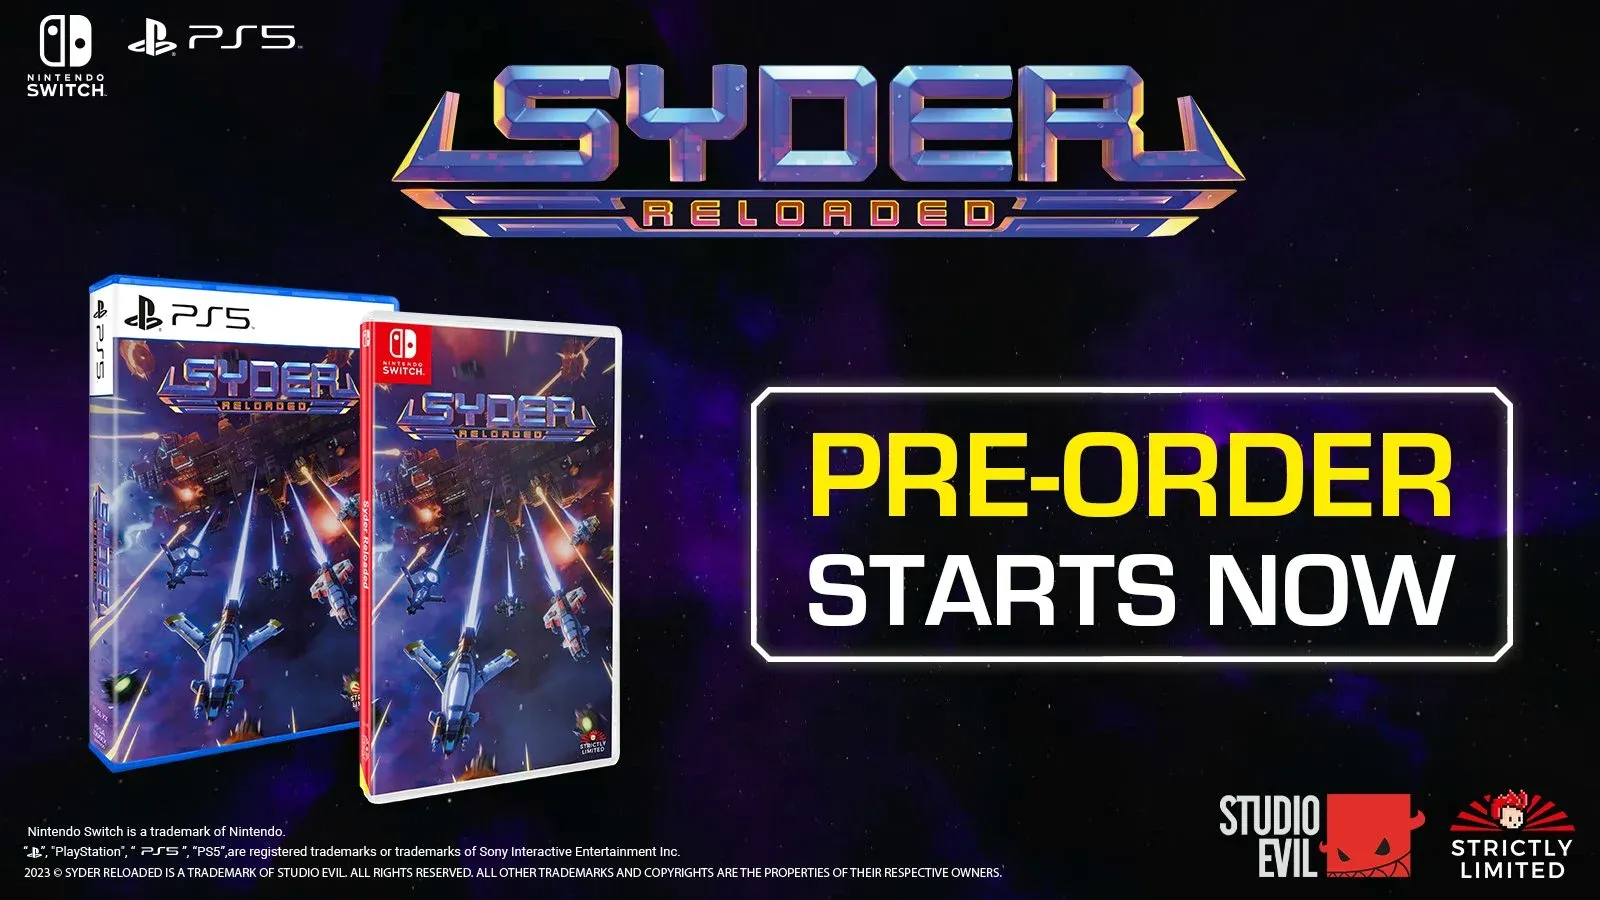 Syder Reloaded Nintendo Switch and PS5 covers